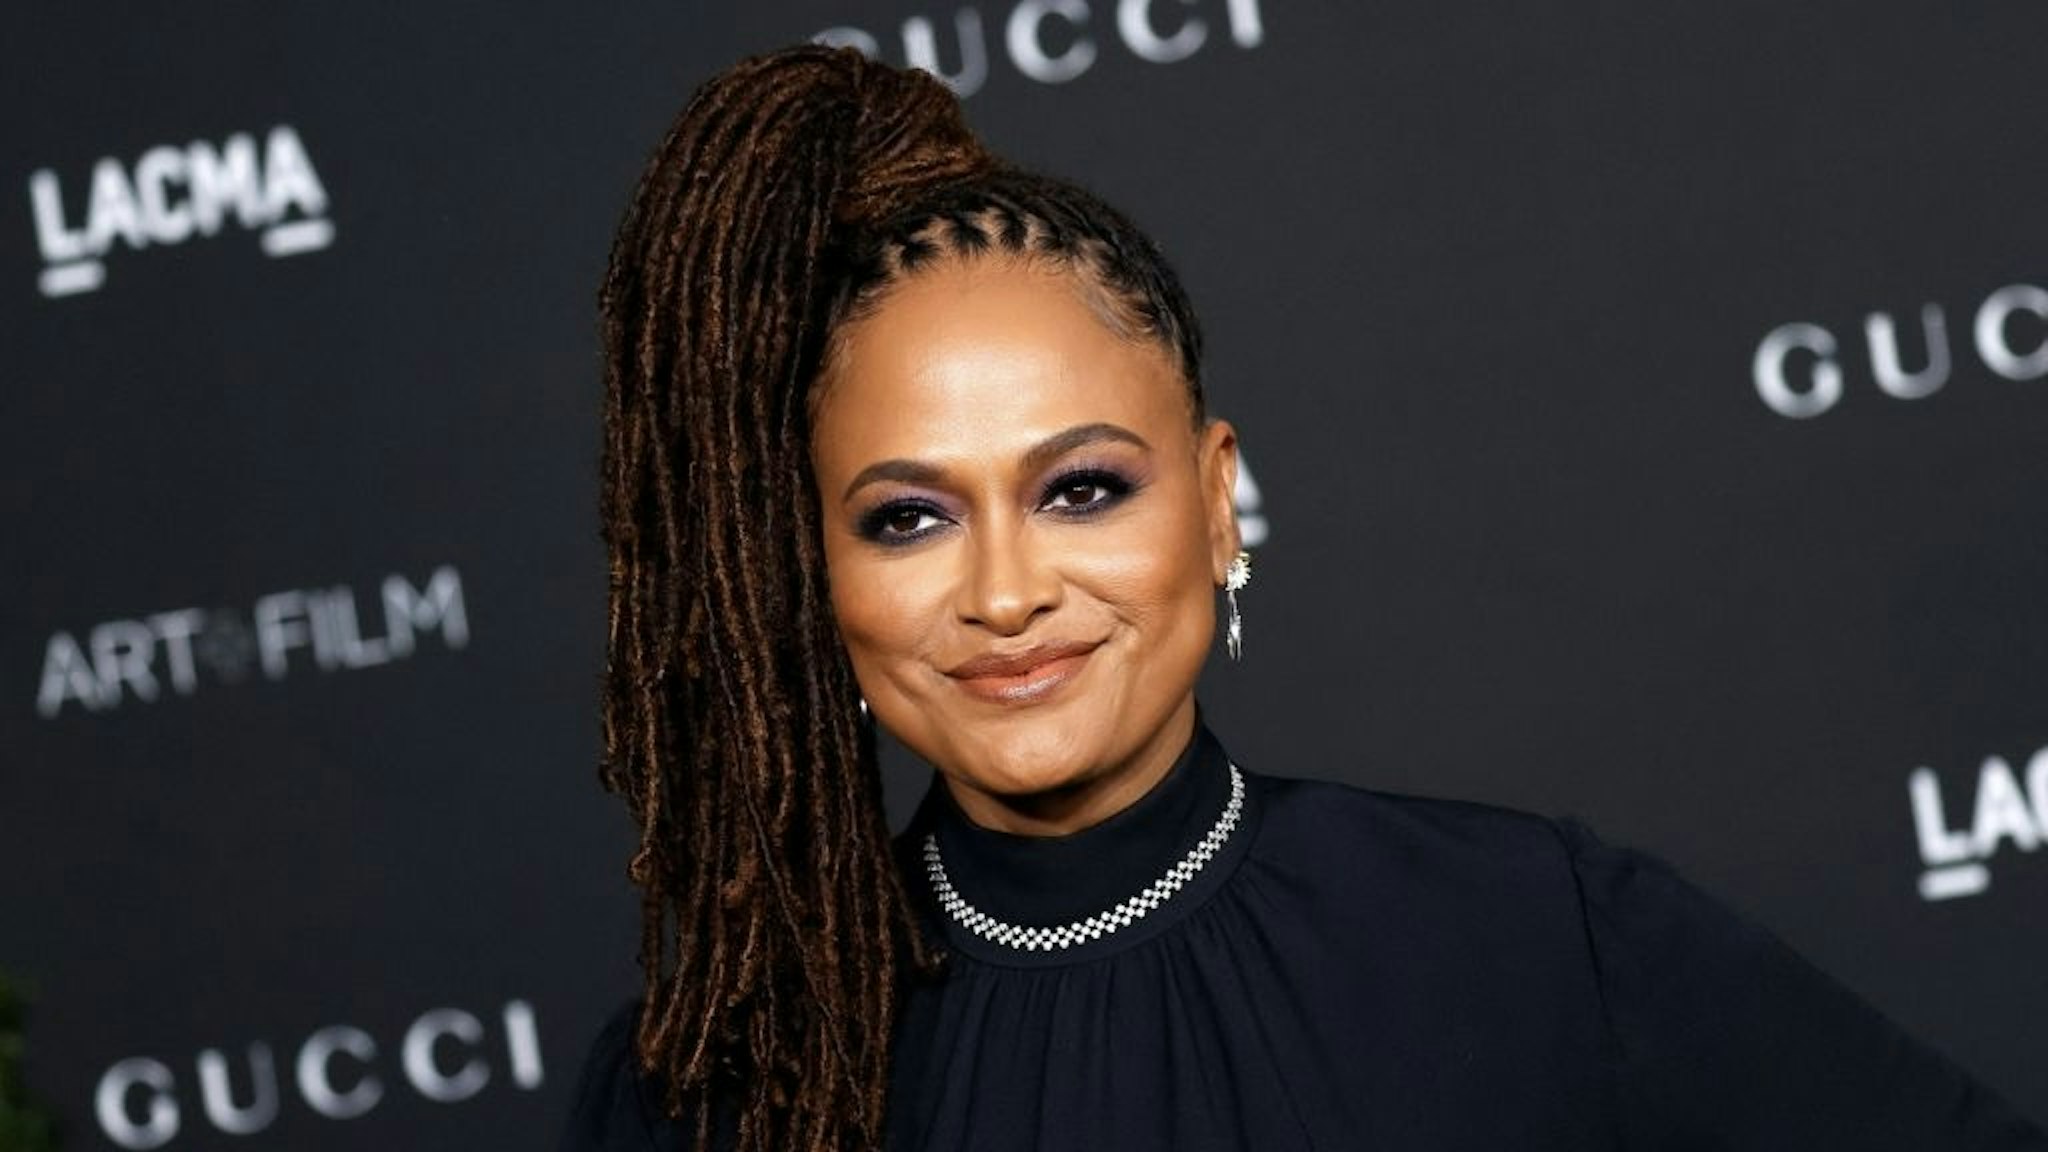 US-ENTERTAINMENT-LACMA US filmmaker Ava DuVernay arrives for the 10th annual LACMA Art+Film gala at the Los Angeles County Museum of Art (LACMA) in Los Angeles, California on November 6, 2021. (Photo by Michael Tran / AFP) (Photo by MICHAEL TRAN/AFP via Getty Images) MICHAEL TRAN / Contributor